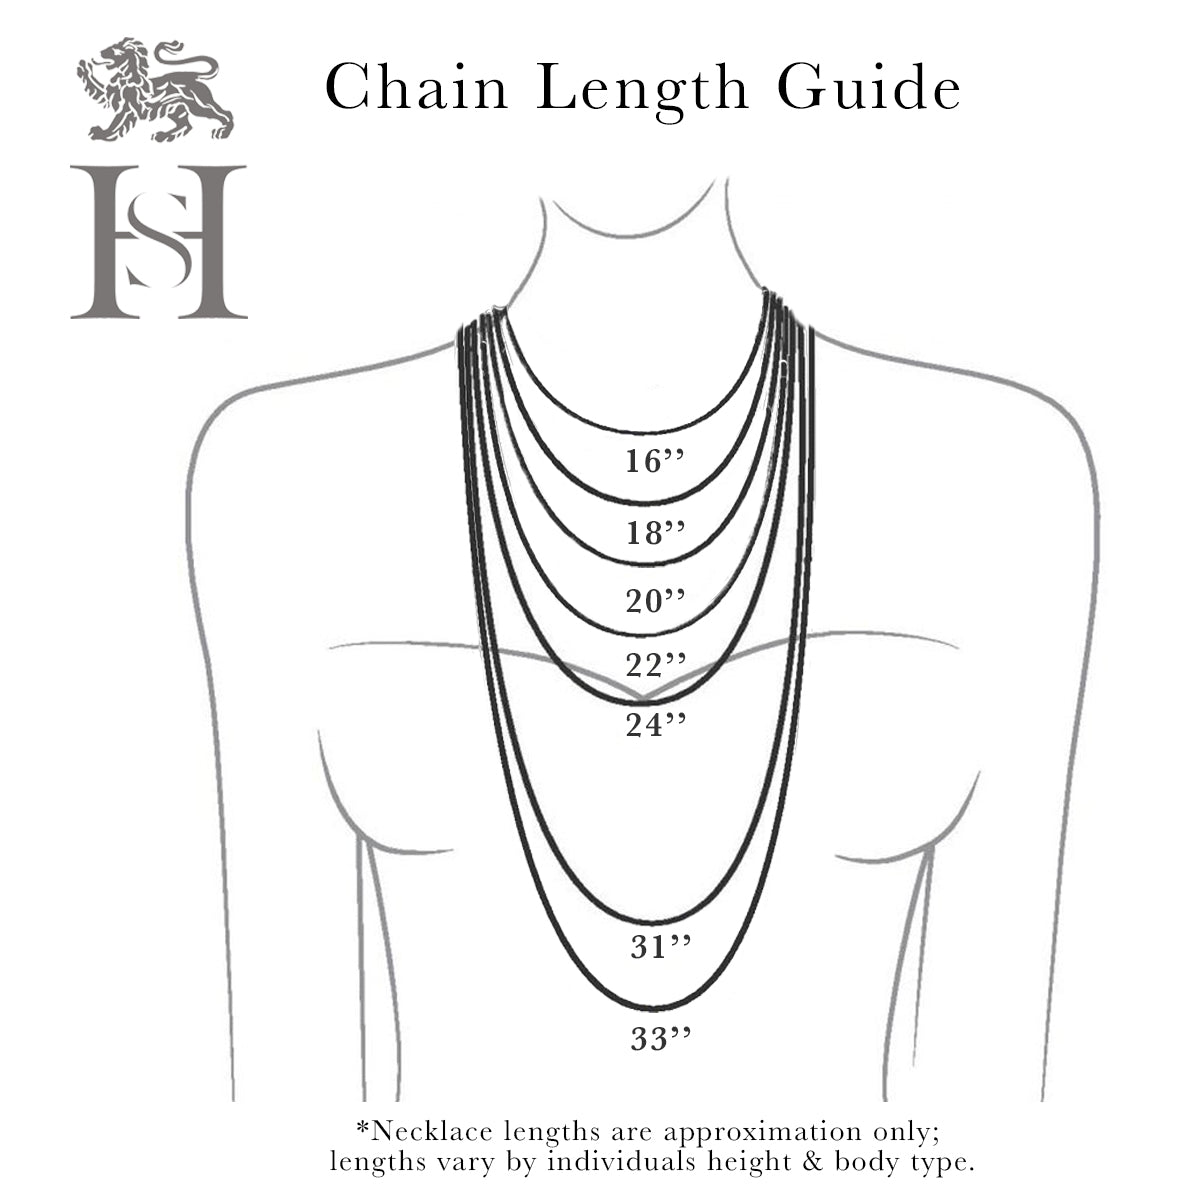 Hersey & Son Silversmiths chain lengths guide 